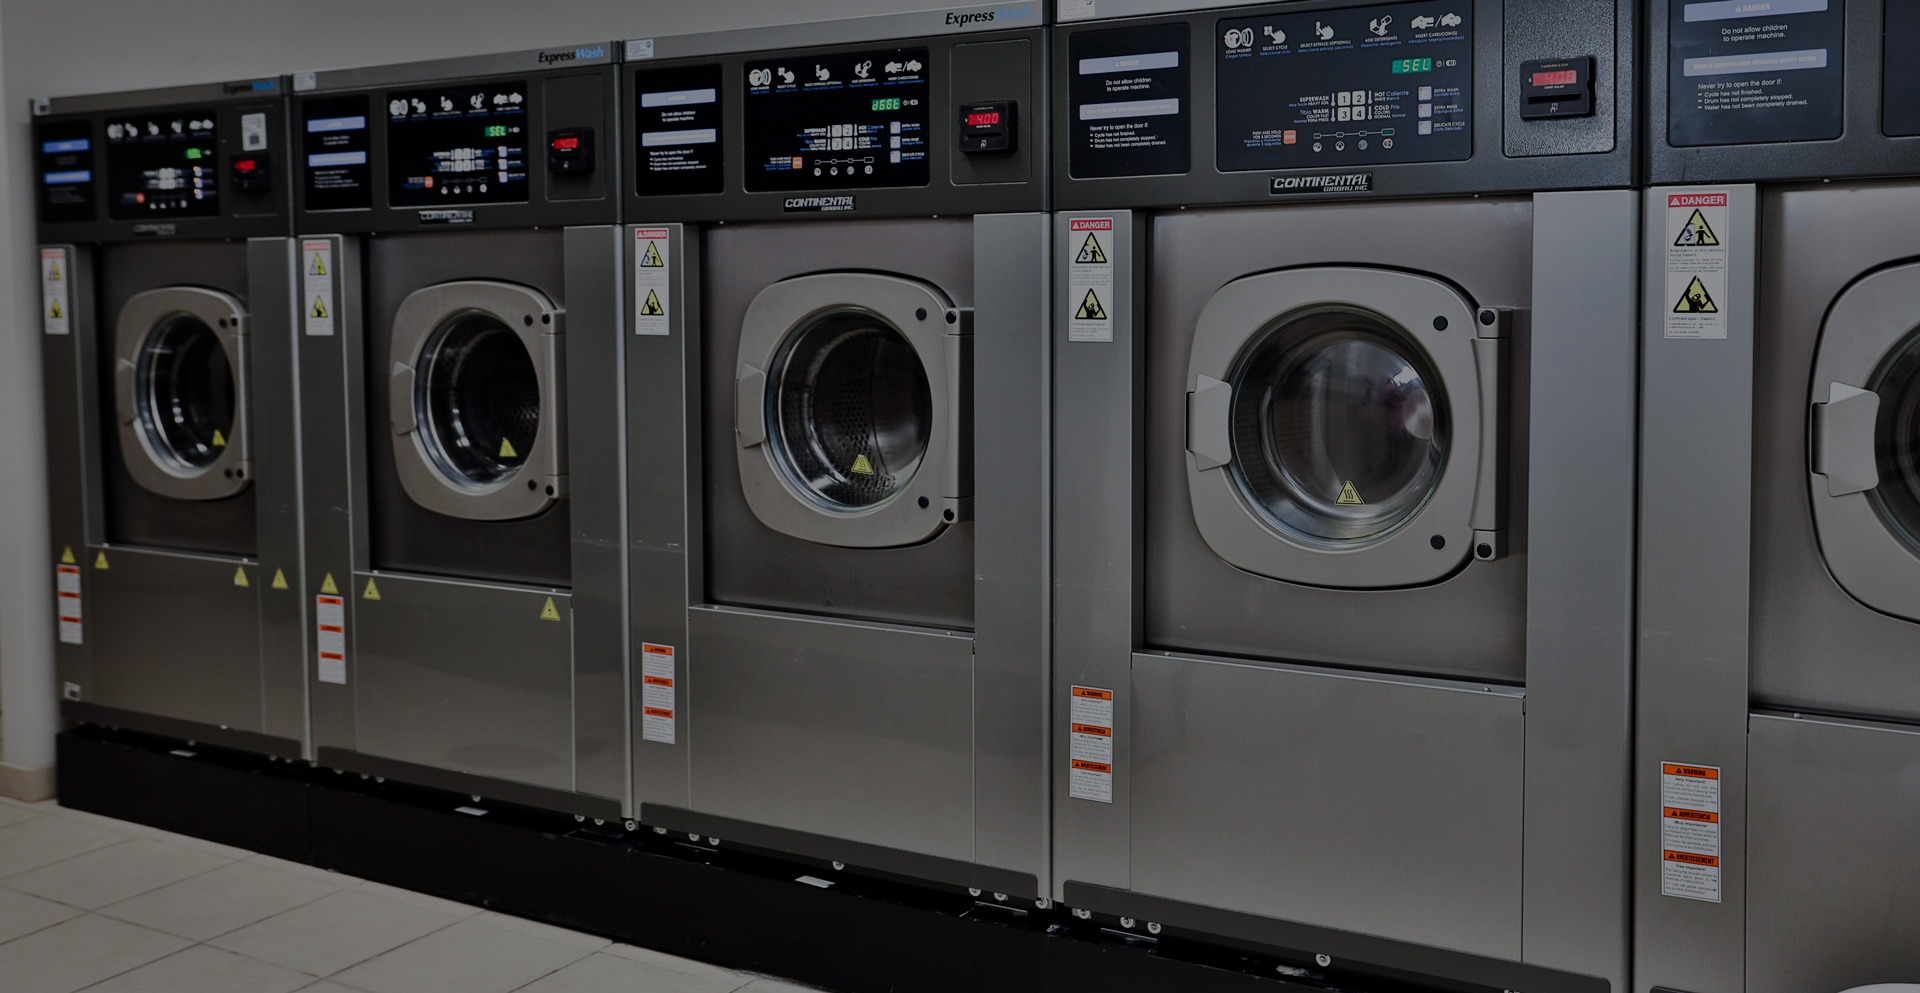 How to Set Your Laundry Machines Up to Accept Tap-to-Pay Payments